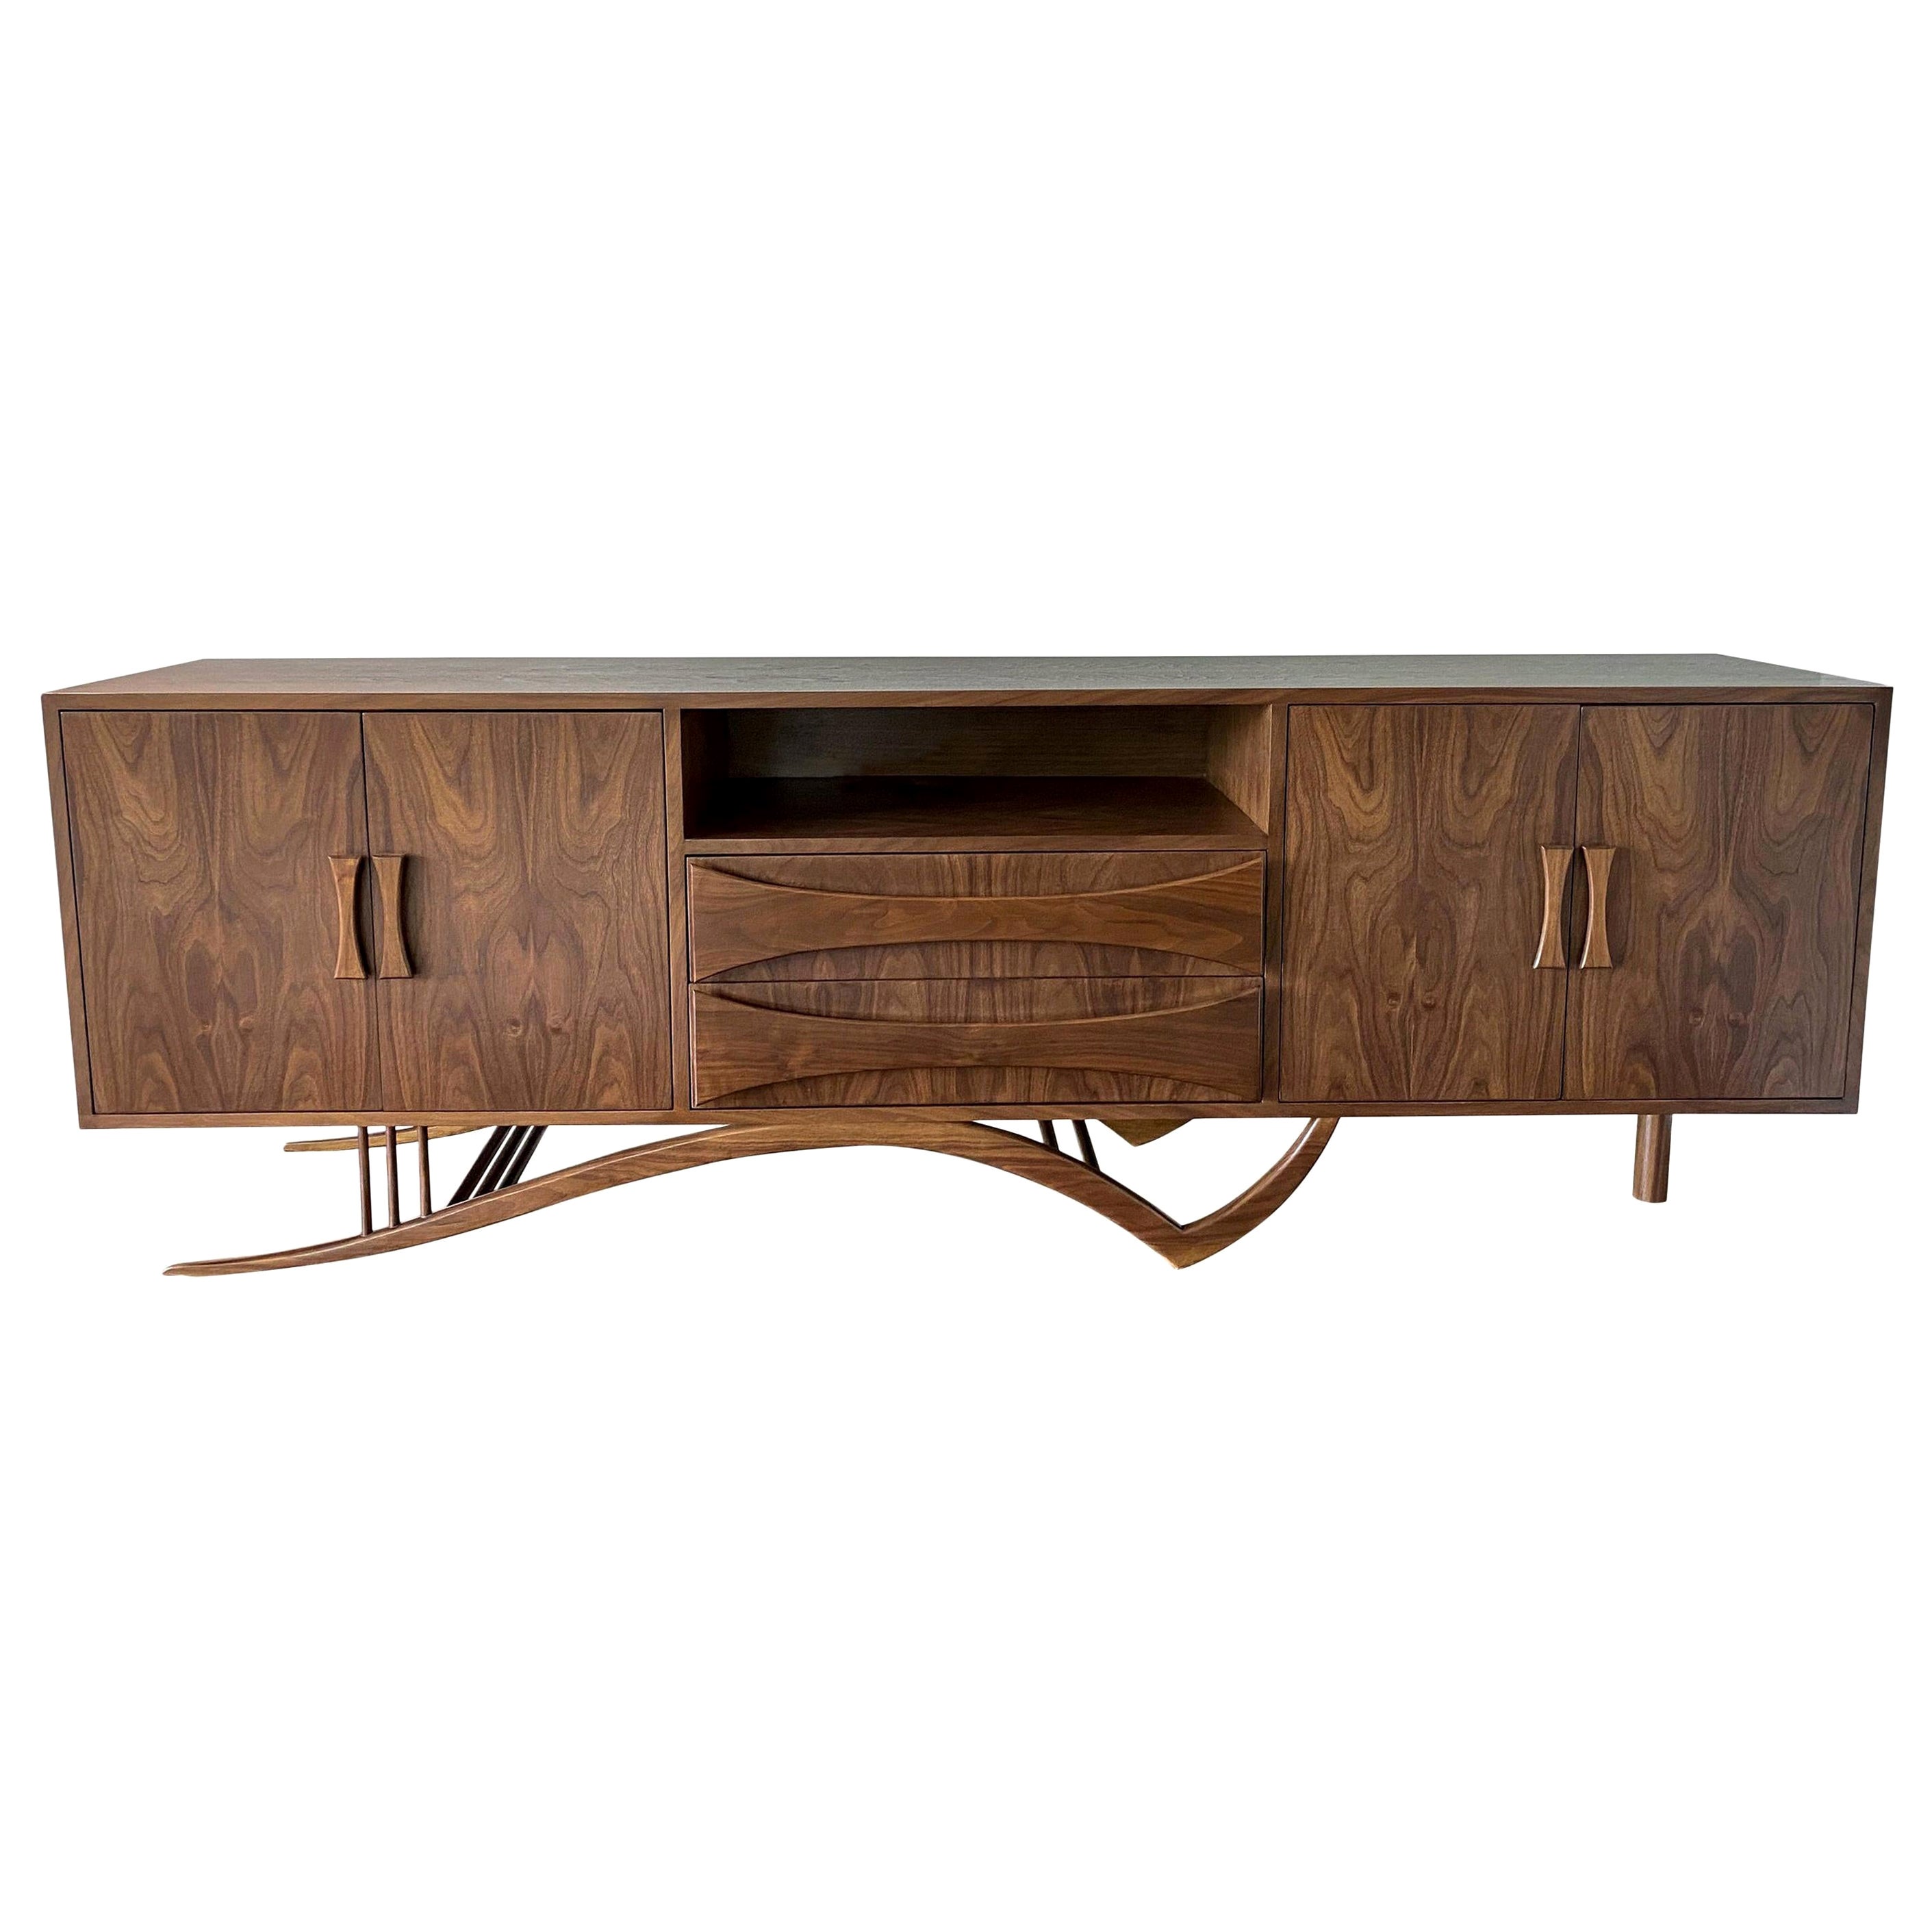 Custom Midcentury Style Walnut Sideboard with Curved Leg by Adesso Imports